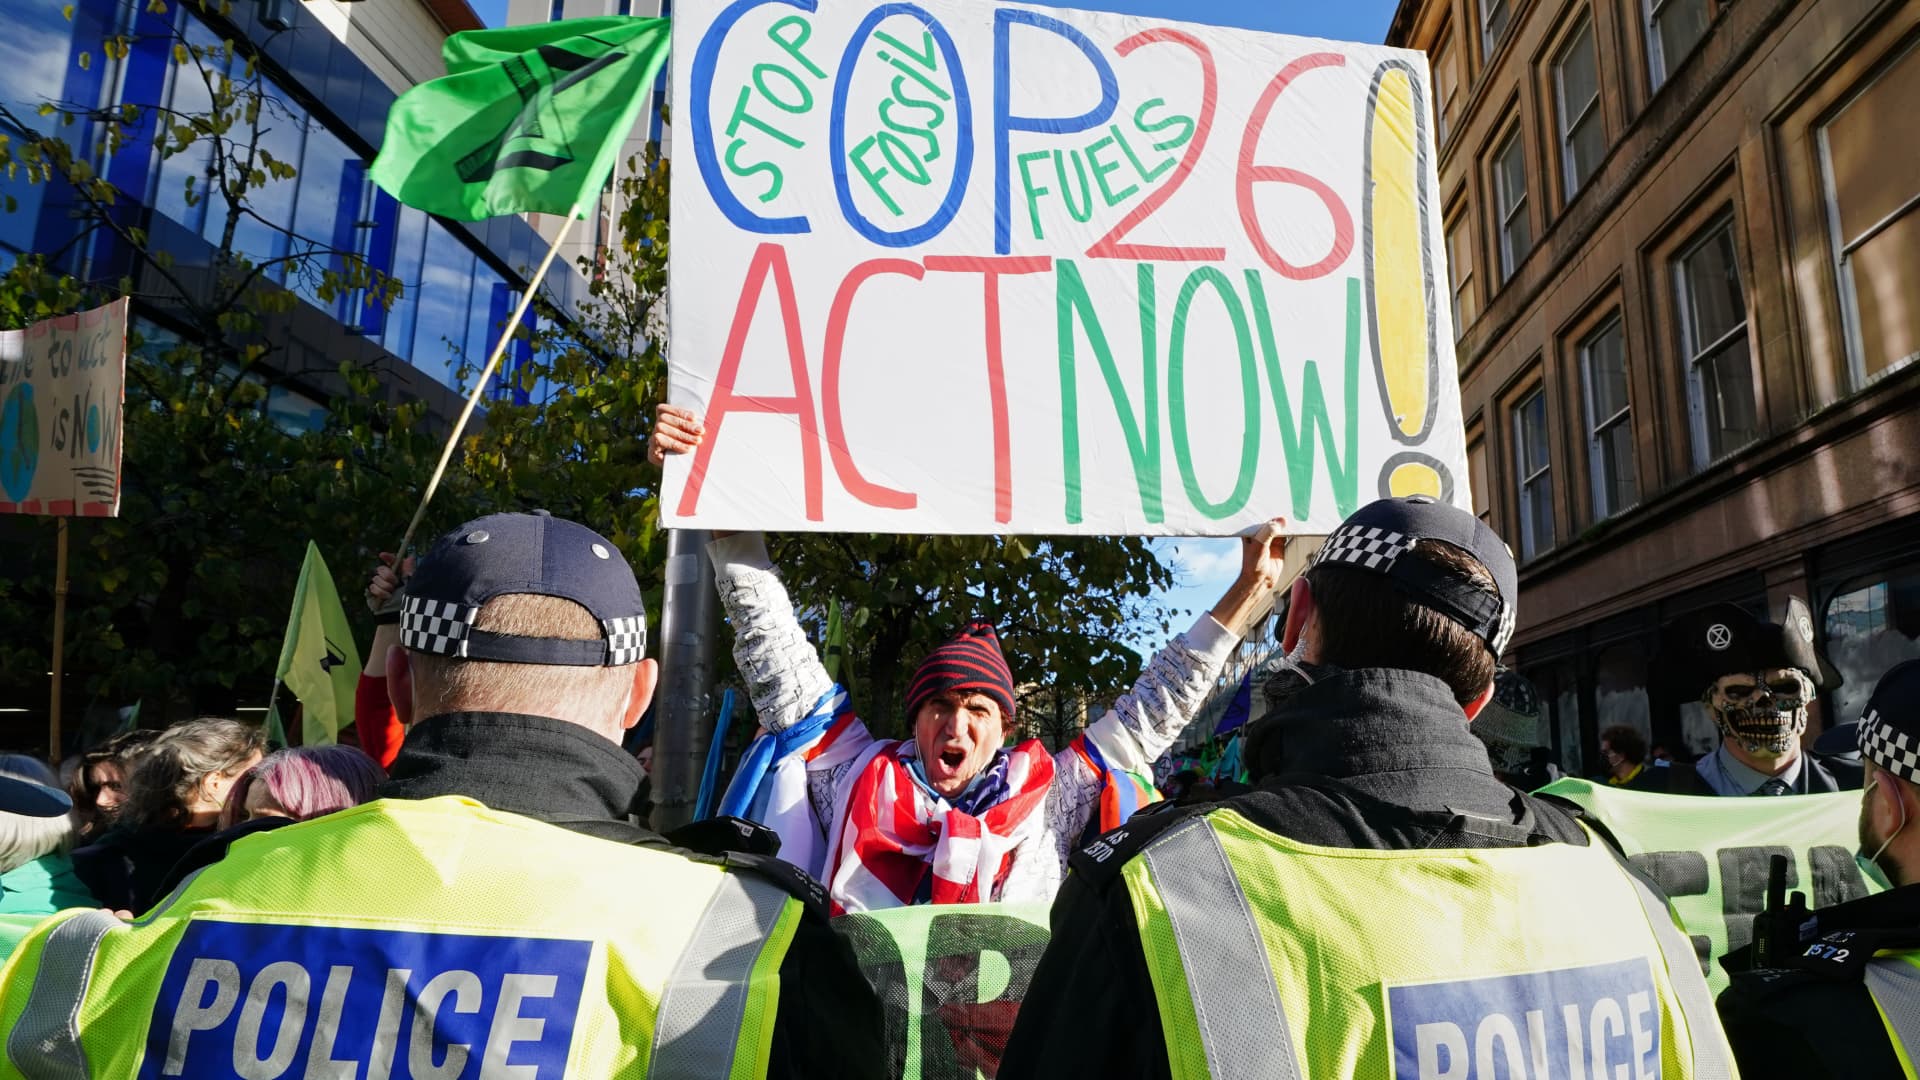 Police and demonstrators at a Extinction Rebellion protest, during the Cop26 summit in Glasgow. Picture date: Wednesday November 3, 2021.